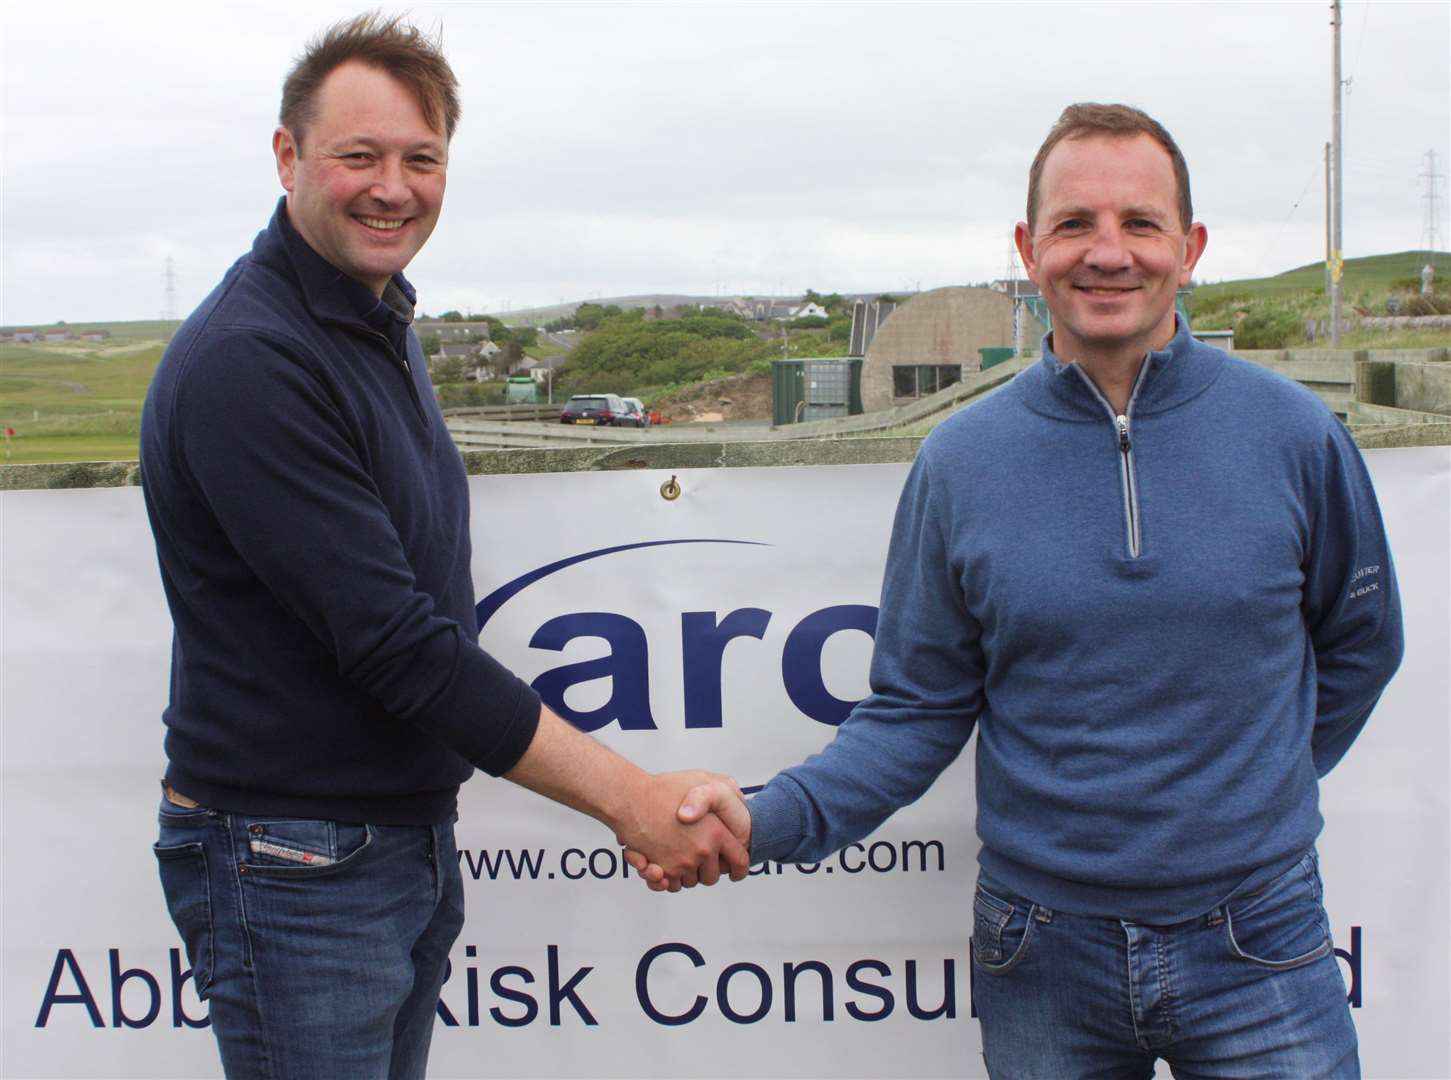 Colin Paterson (left) is congratulated by match secretary Andy Bain following his victory in Reay's Rotary Open, which was sponsored by Abbott Risk Consulting.